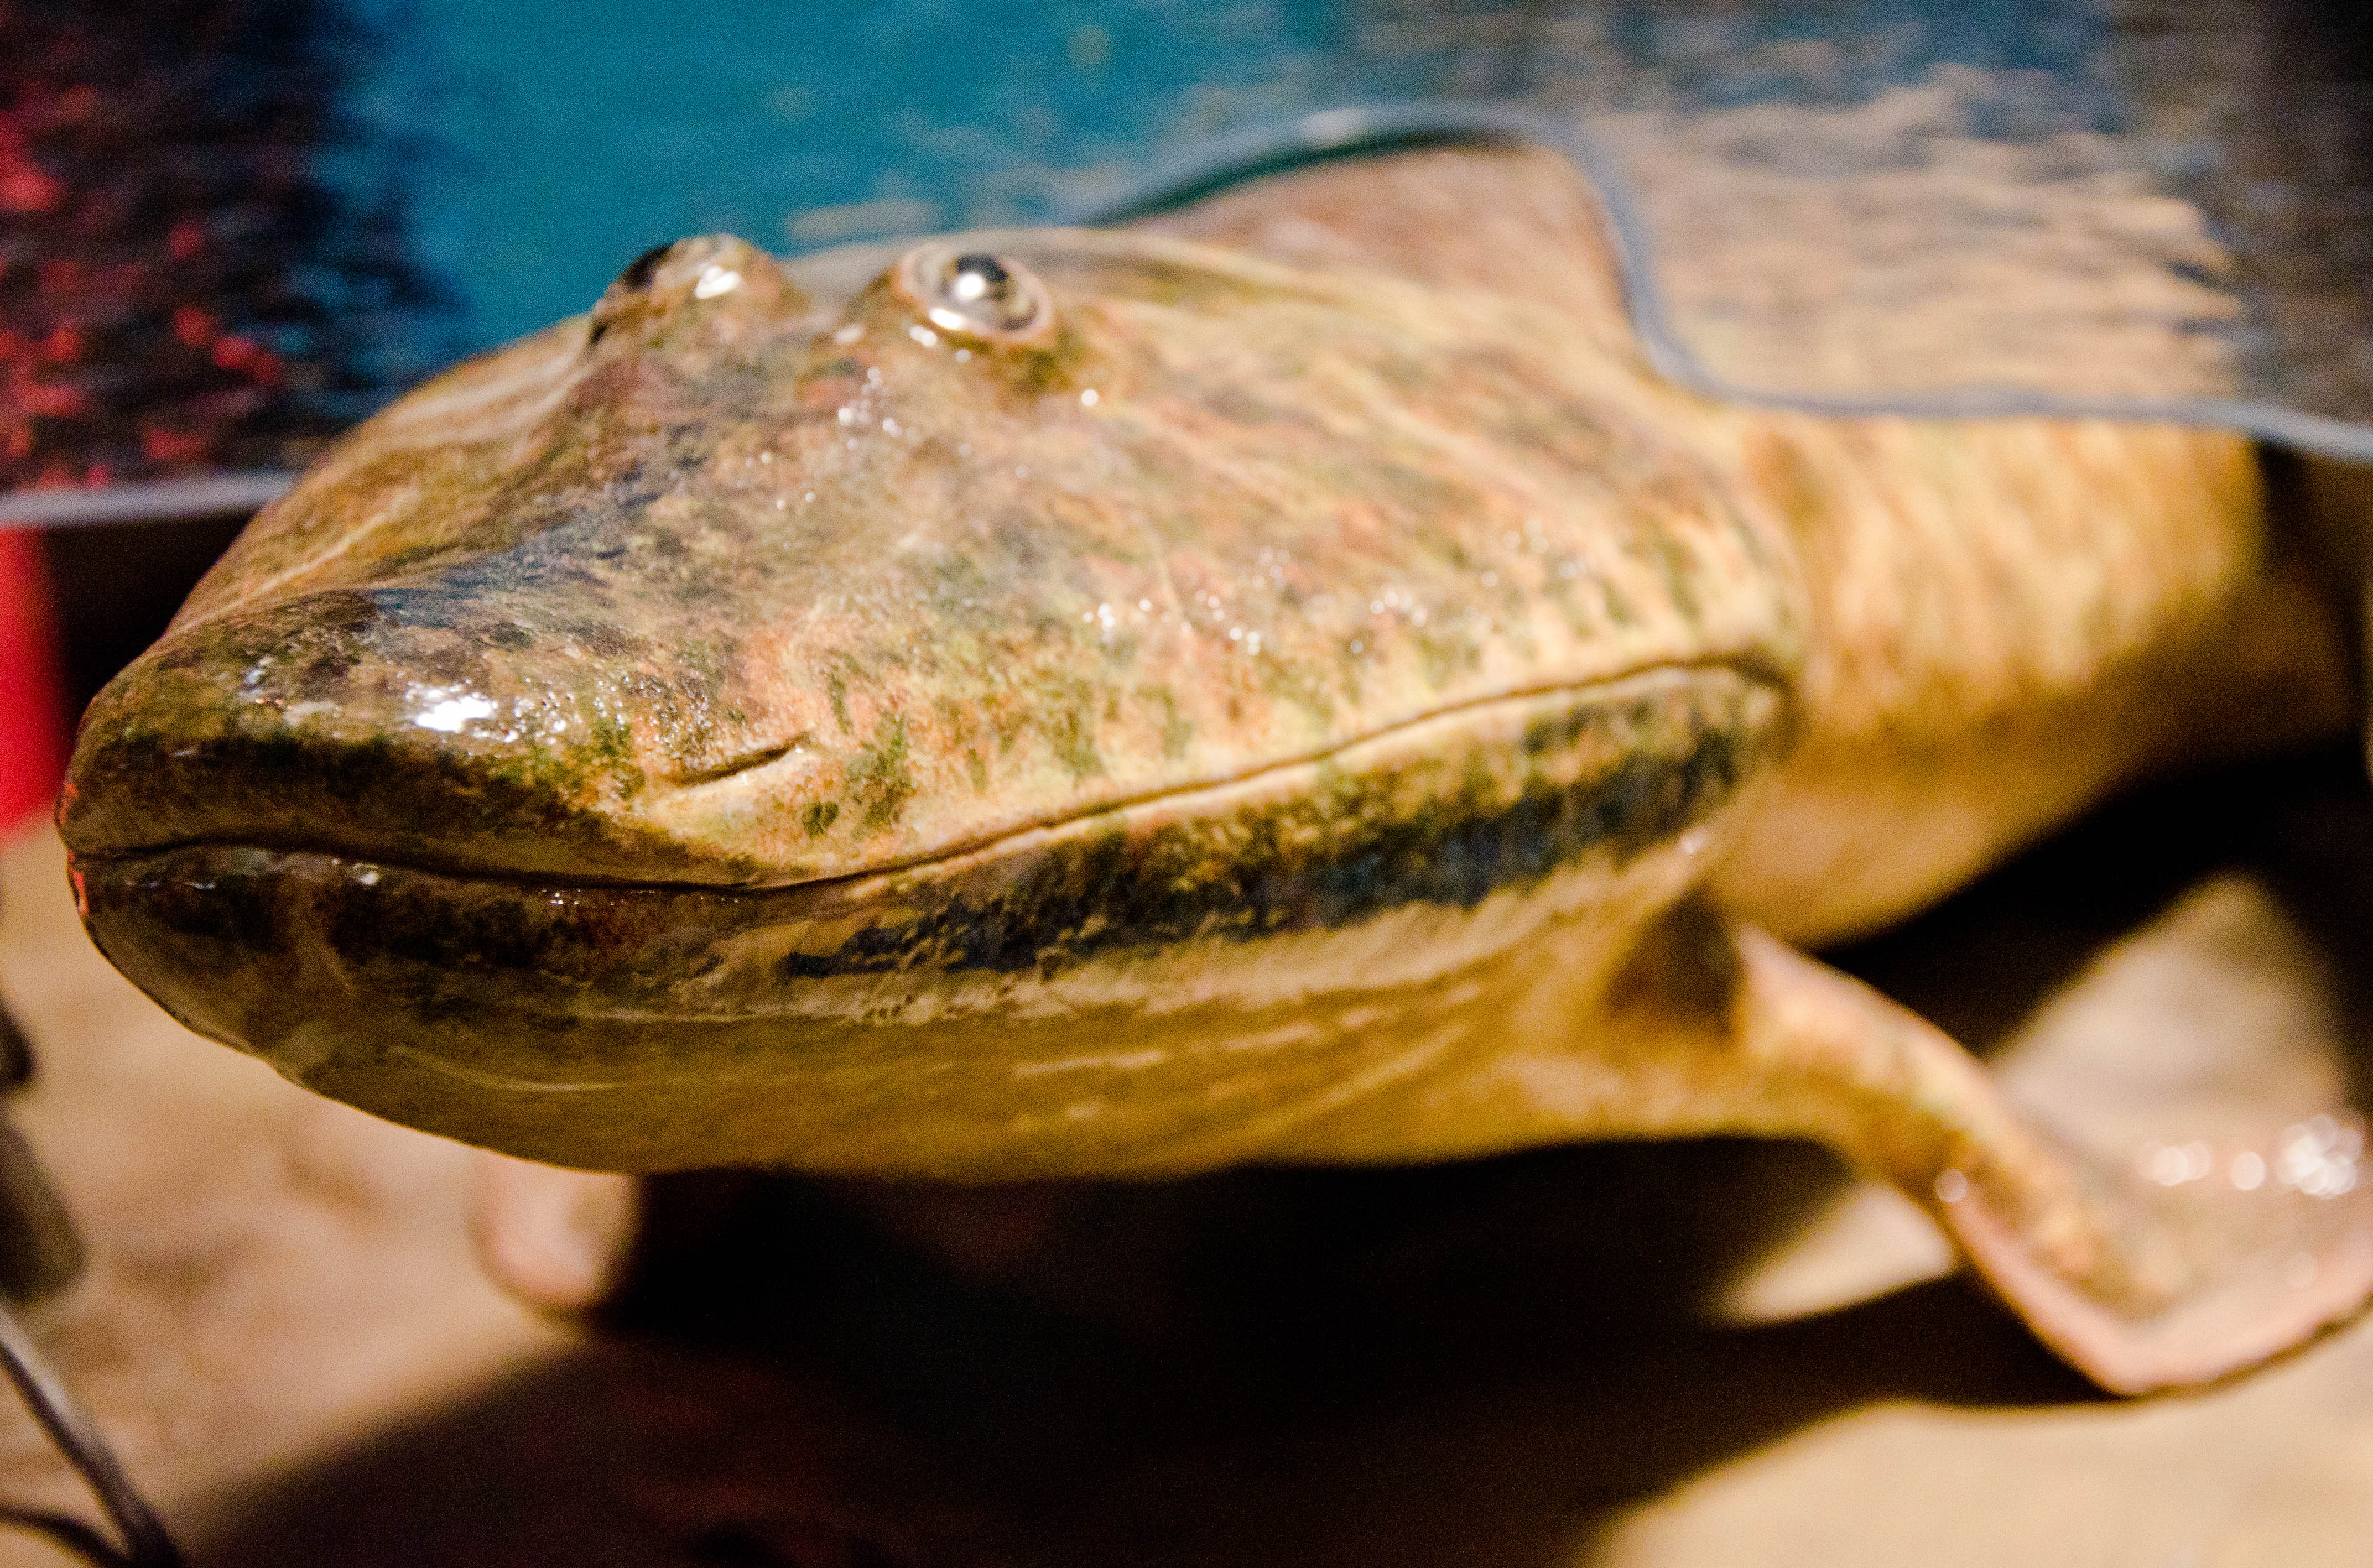 Close-up view of a lungfish out of water as mammals appeared.